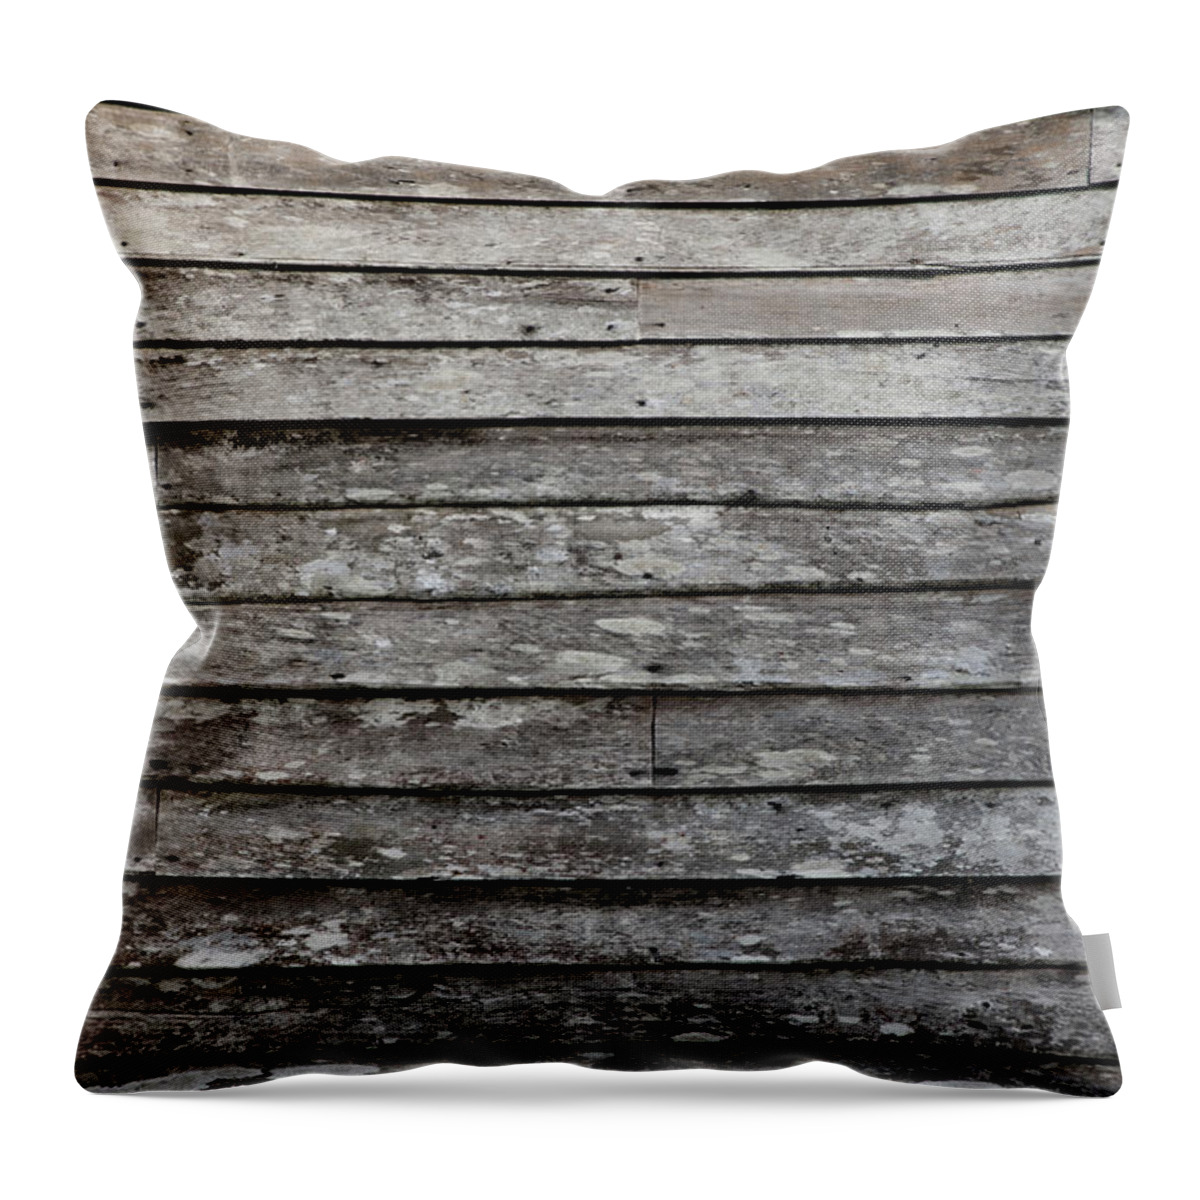 Hardwood Tree Throw Pillow featuring the photograph Wood Plank Background by Primeimages